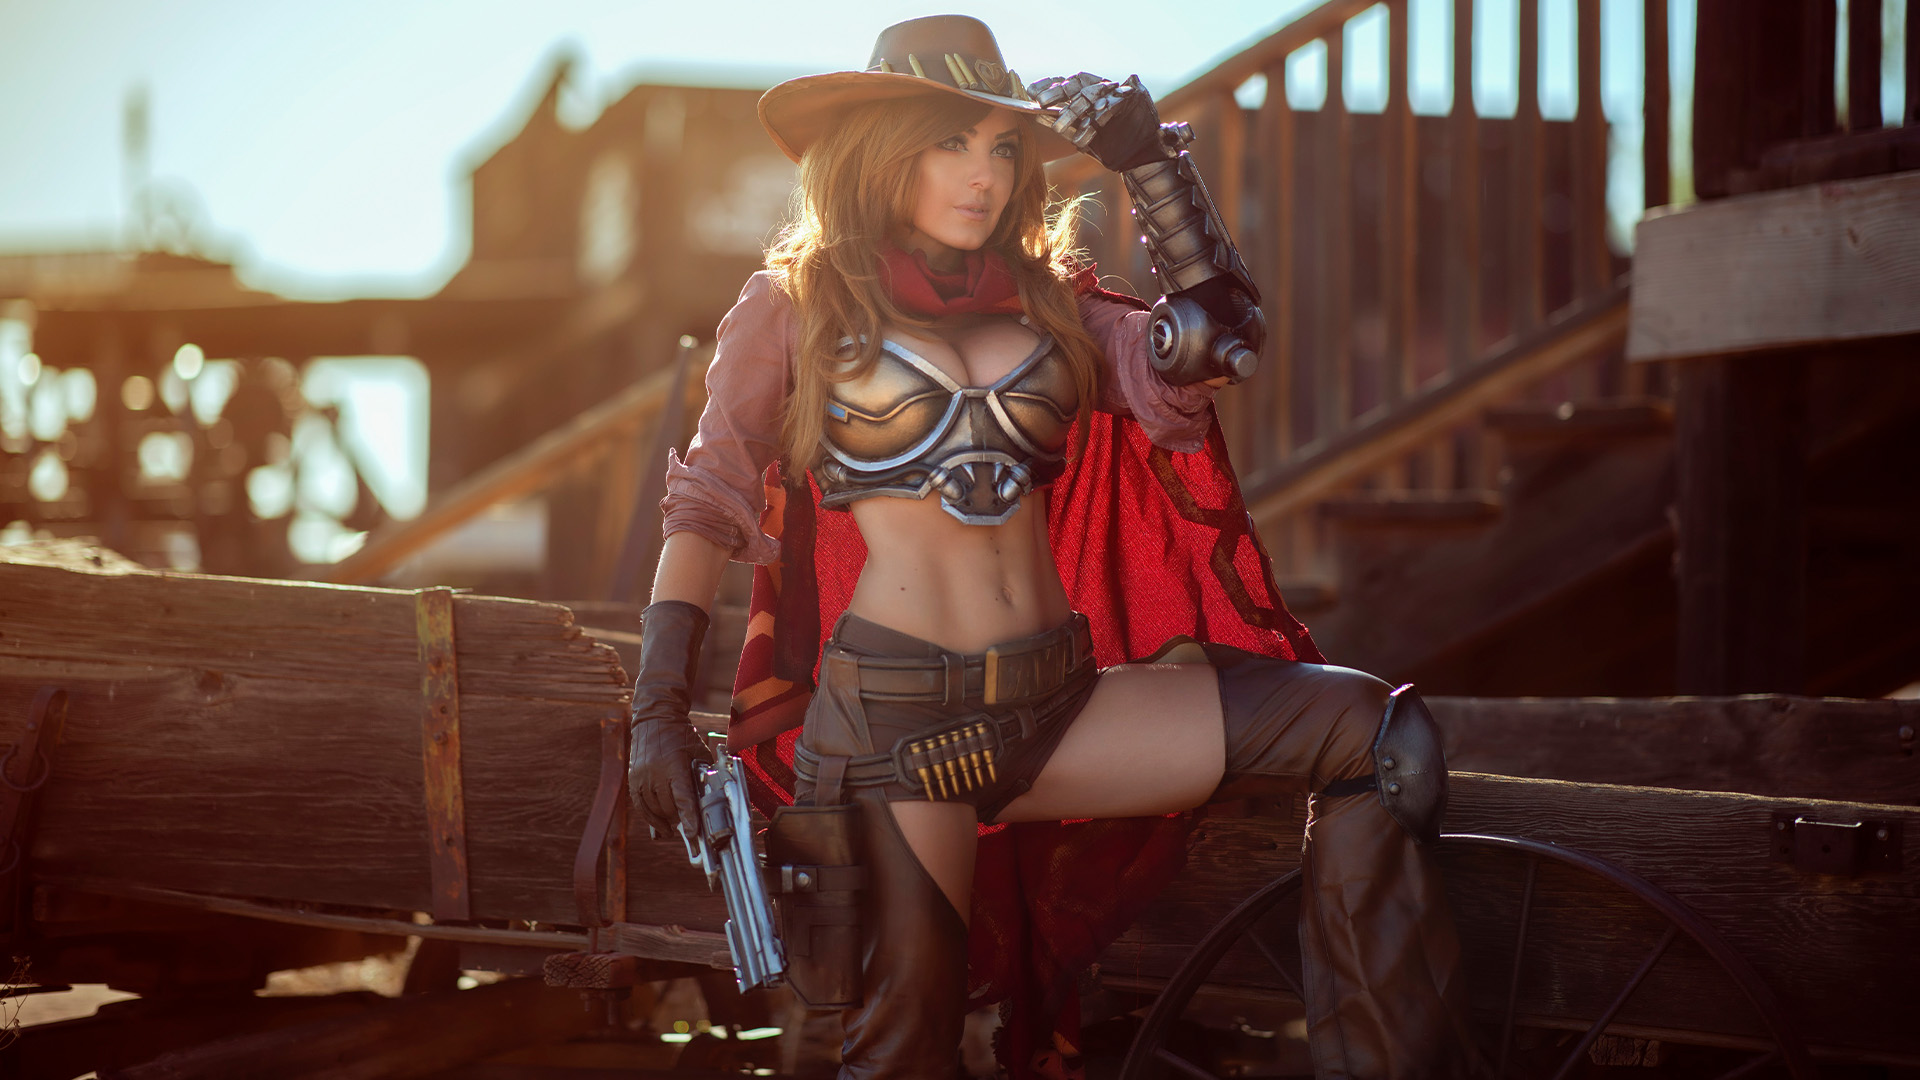 People 1920x1080 model cosplay Overwatch cleavage belly button thigh high boots revolver cowboy cowboy hats cowgirl costumes bullet women girl in armor Jessica Nigri Blizzard Entertainment figure-hugging armor genderswap boobs girls with guns women with hats women outdoors long hair